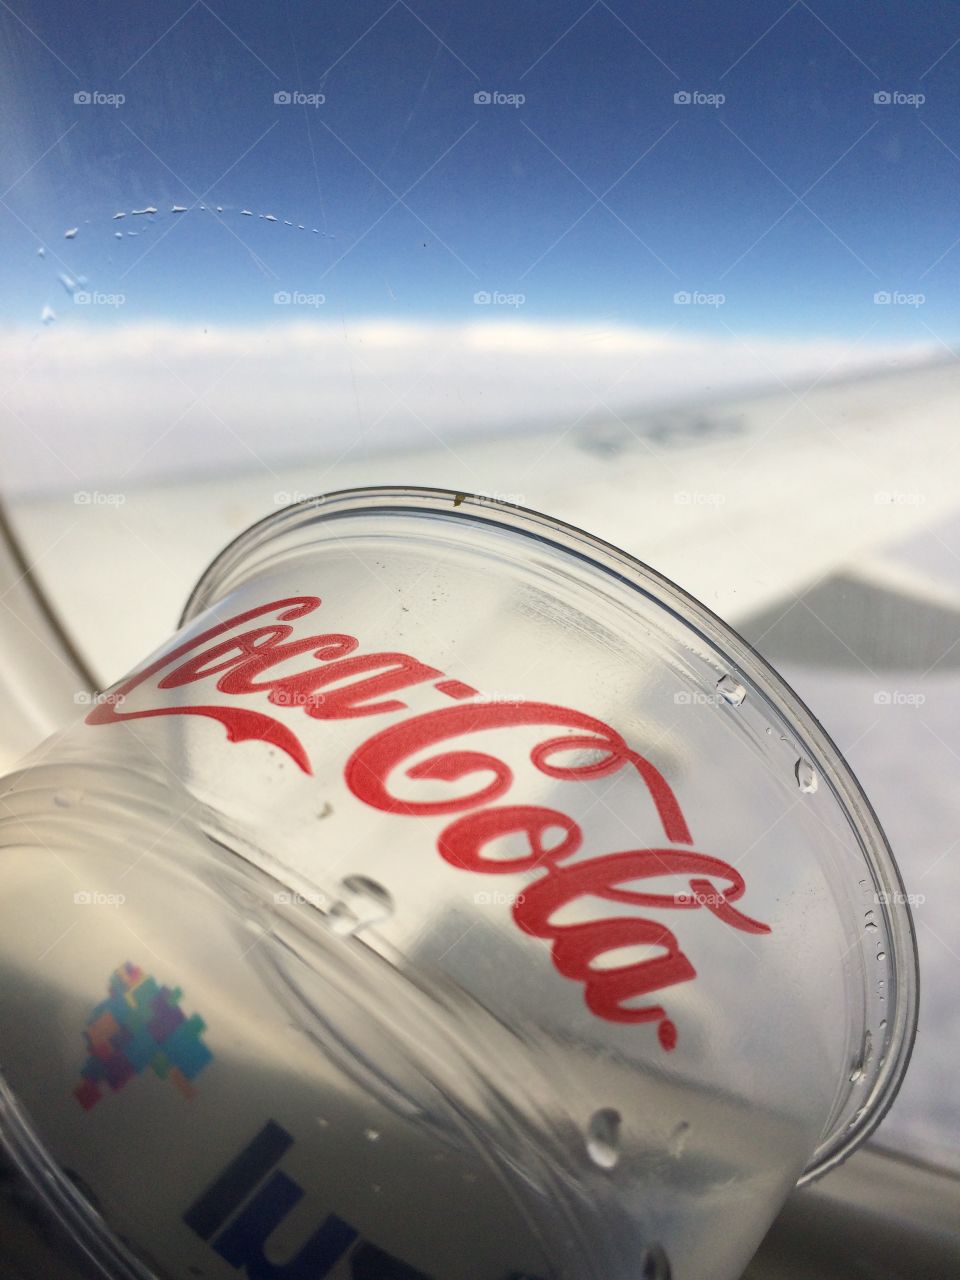 Coke in ther airplane